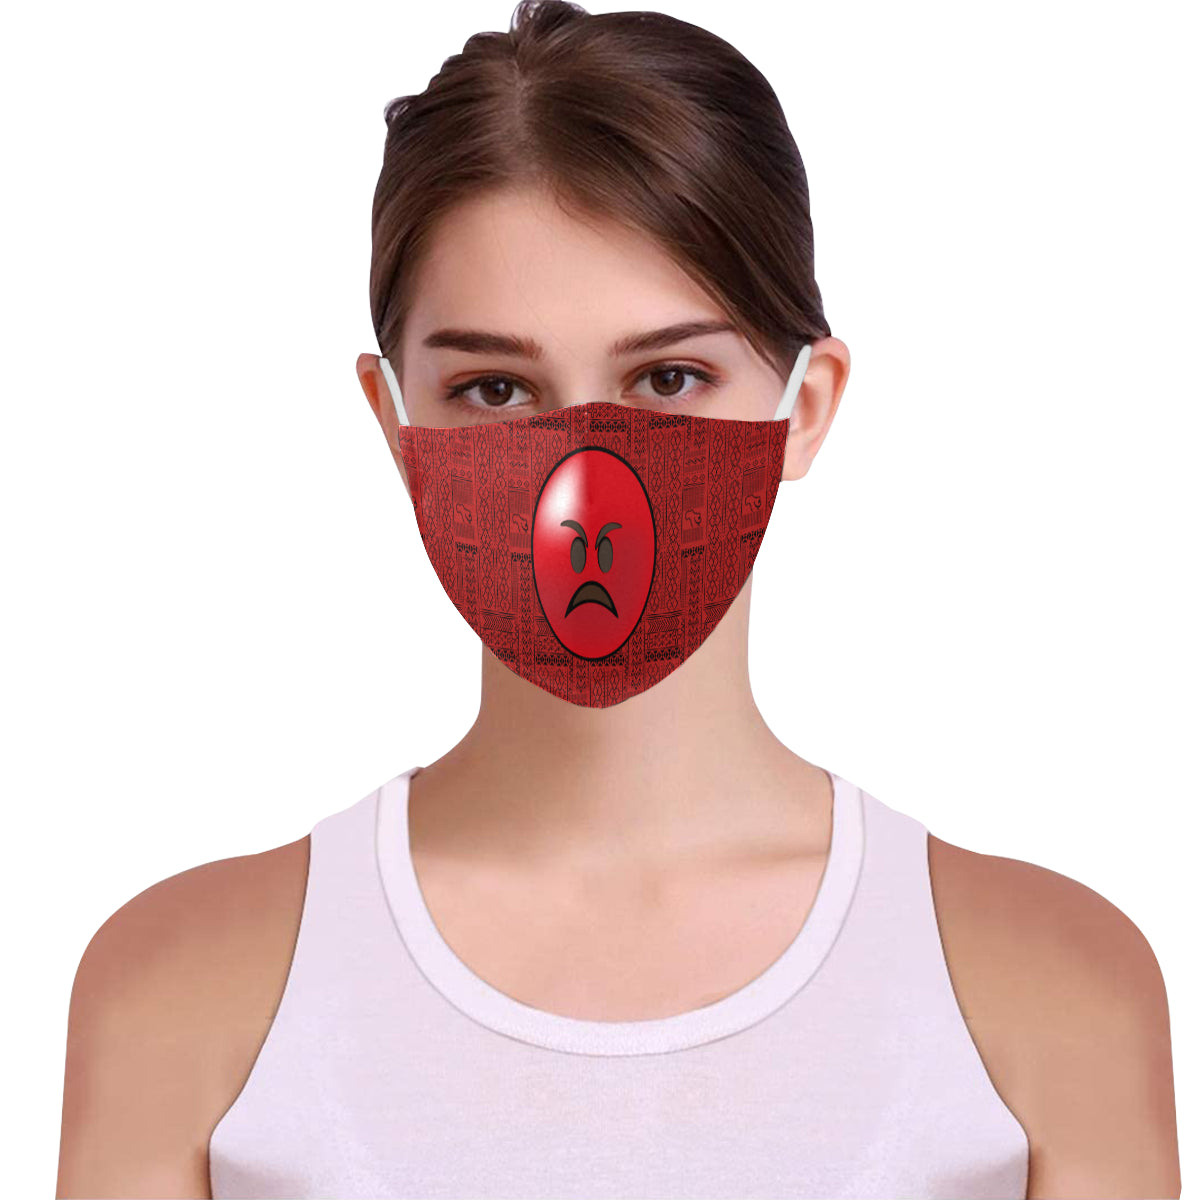 Angry face Tribal Print Emoji Cotton Fabric Face Mask with Filter Slot and Adjustable Strap - Non-medical use (2 Filters Included)